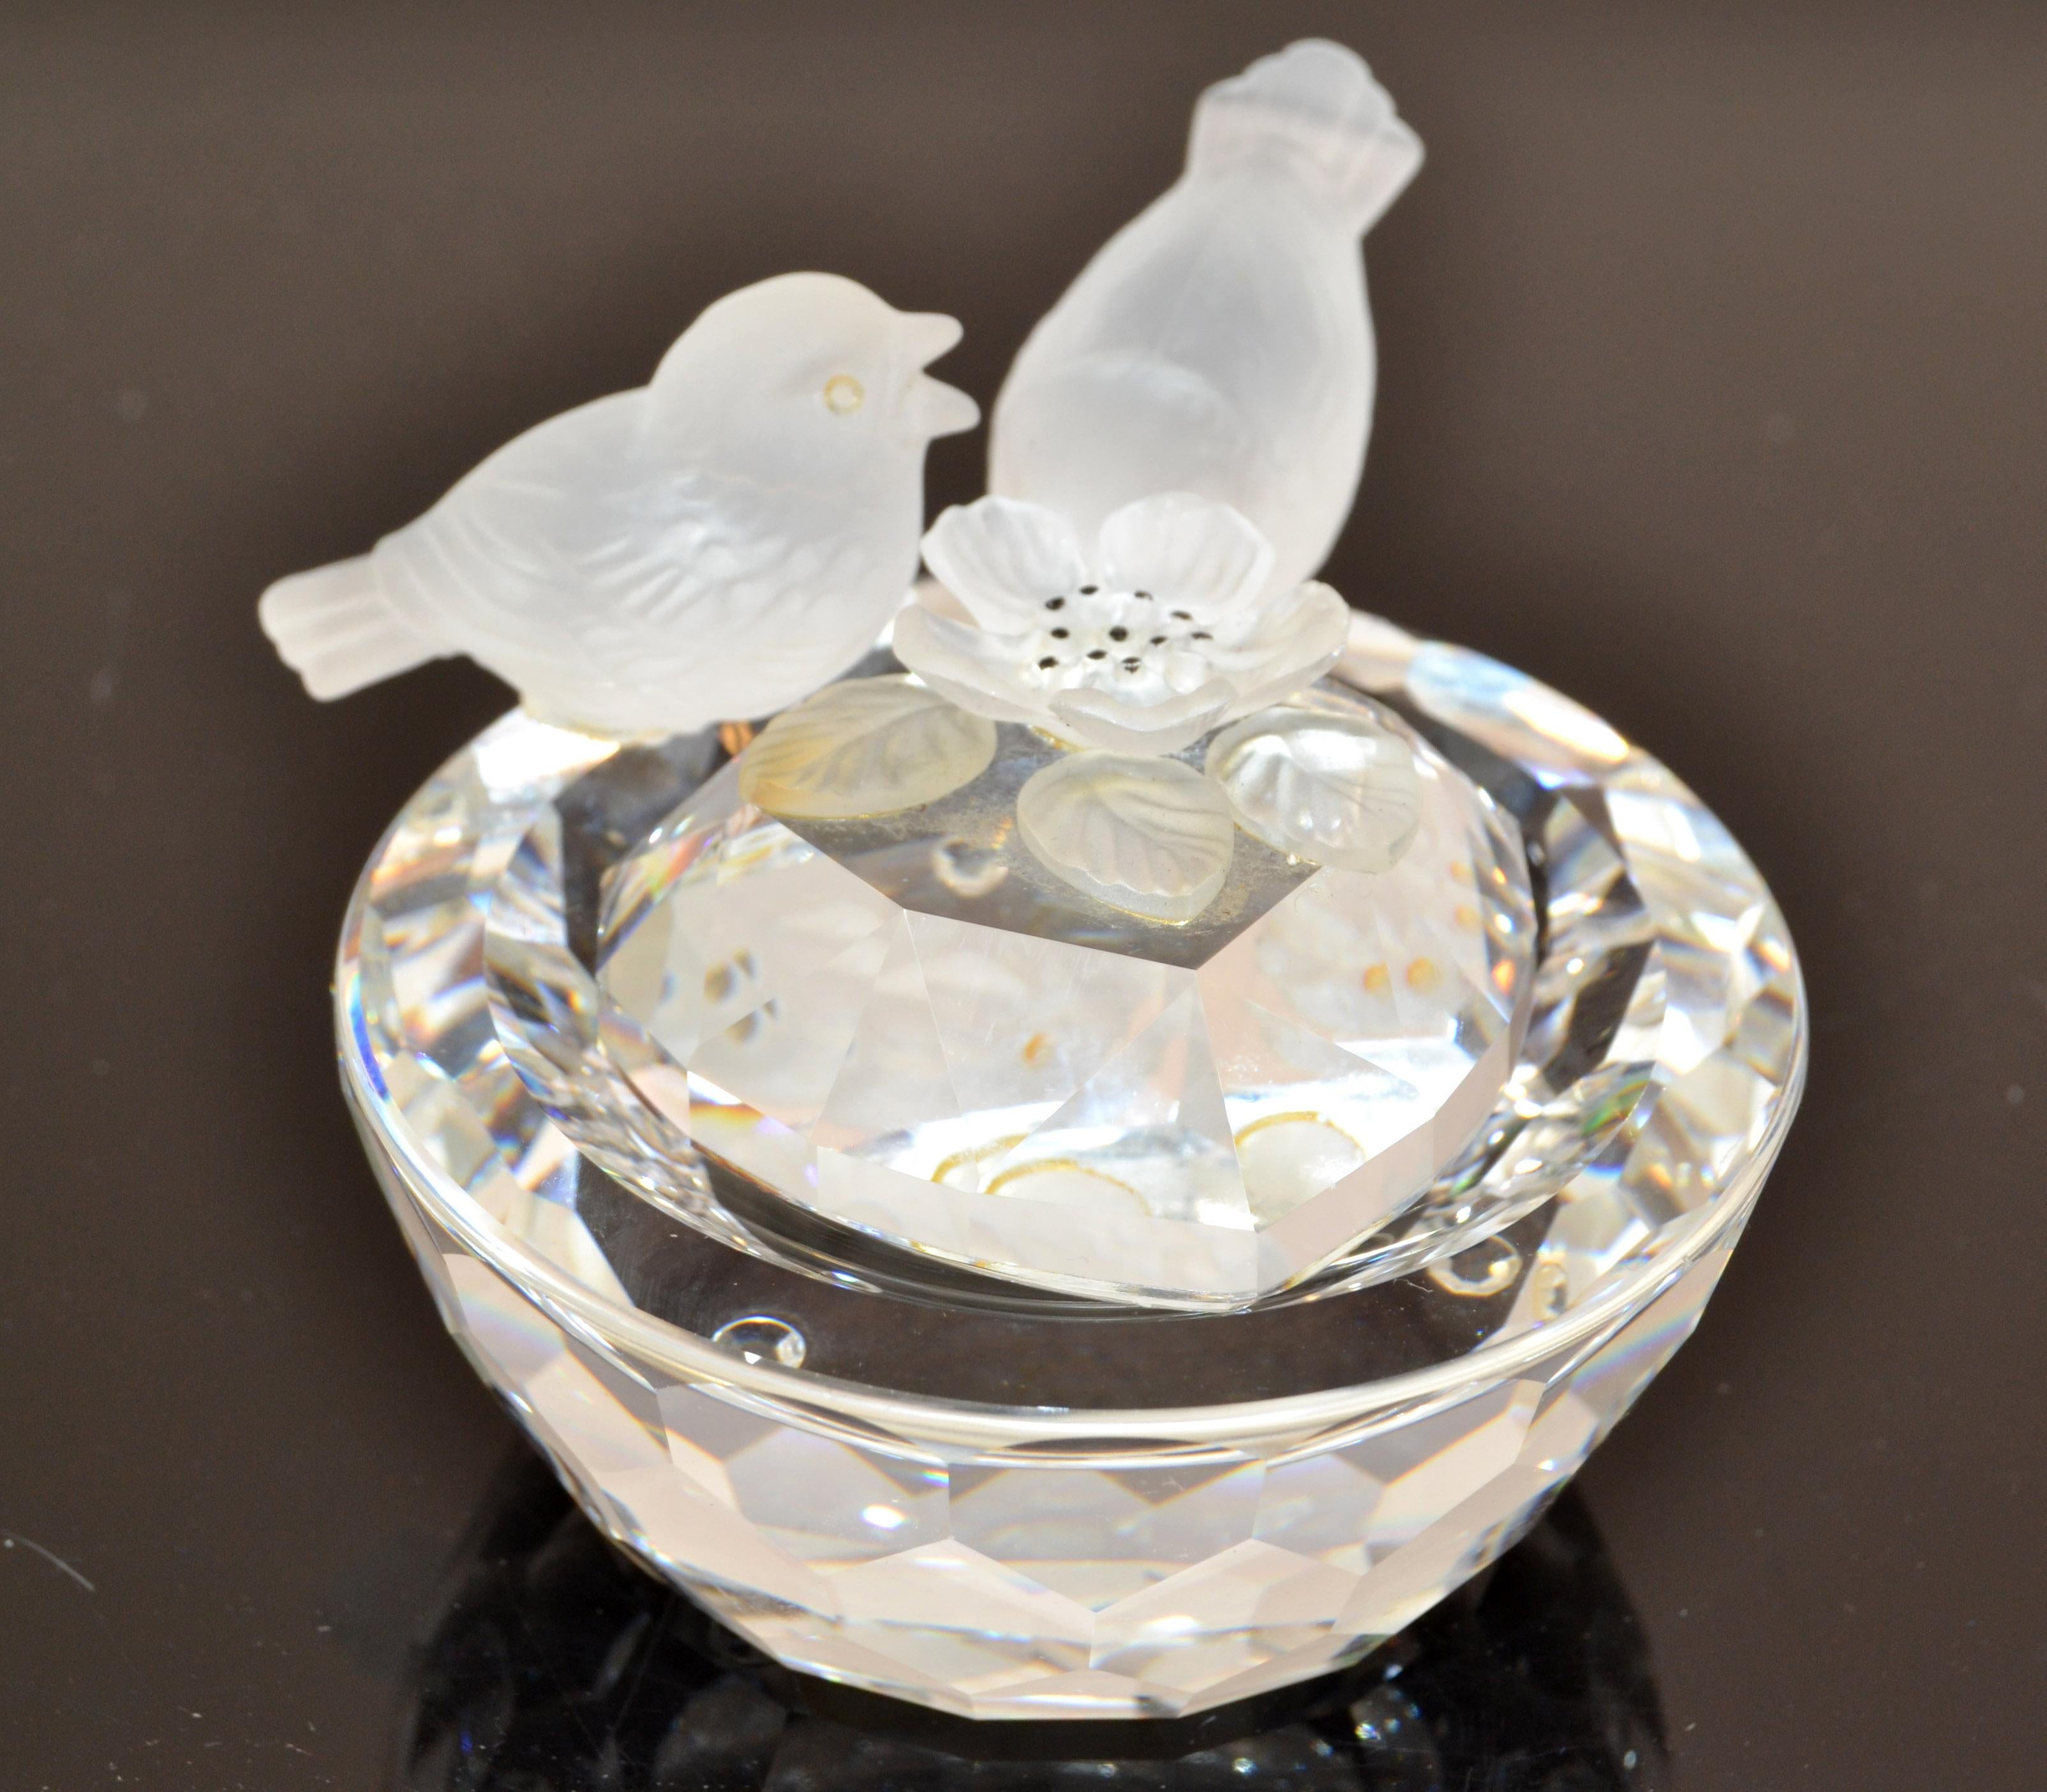 Vintage Swarovski Crystal Faceted Bowl two Birds sitting at the border as if taking a bath, Art Deco Style made in Austria in the 1970.
Features faceted Crystal Bowl attached with 2 Bird Figurines and a Flower Heart shape lid.
Signed on the Base,